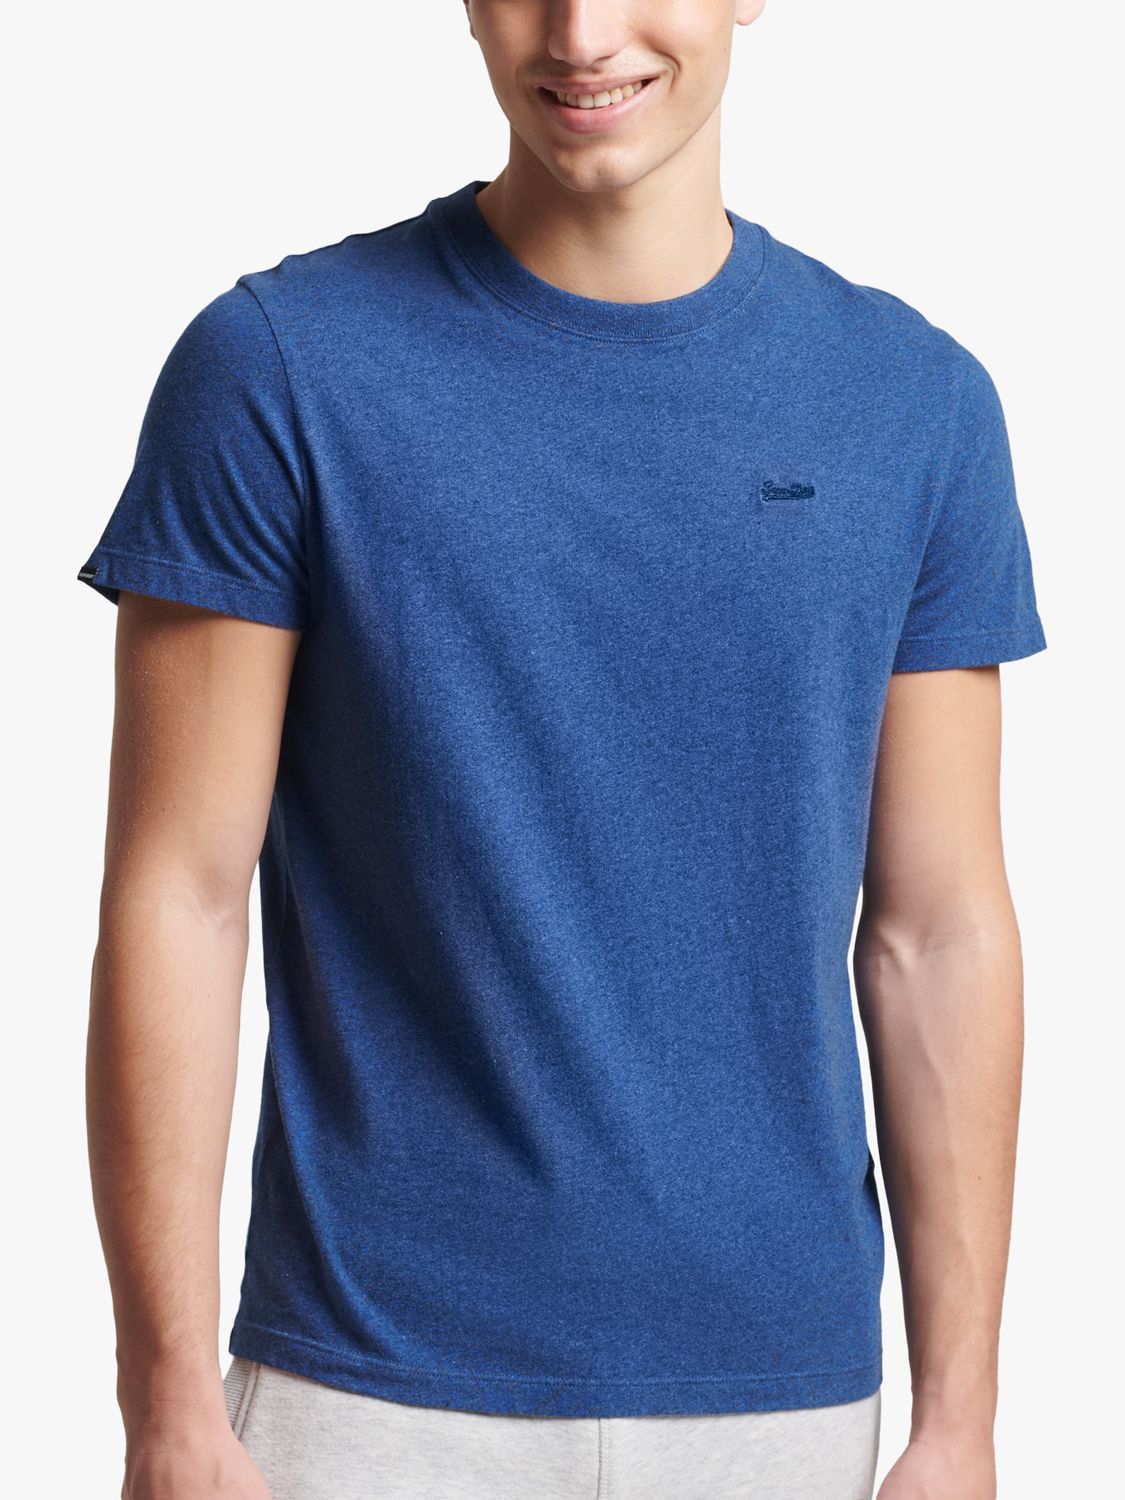 Superdry Organic Cotton Micro Embroidered T-Shirt, Bright Blue Marl